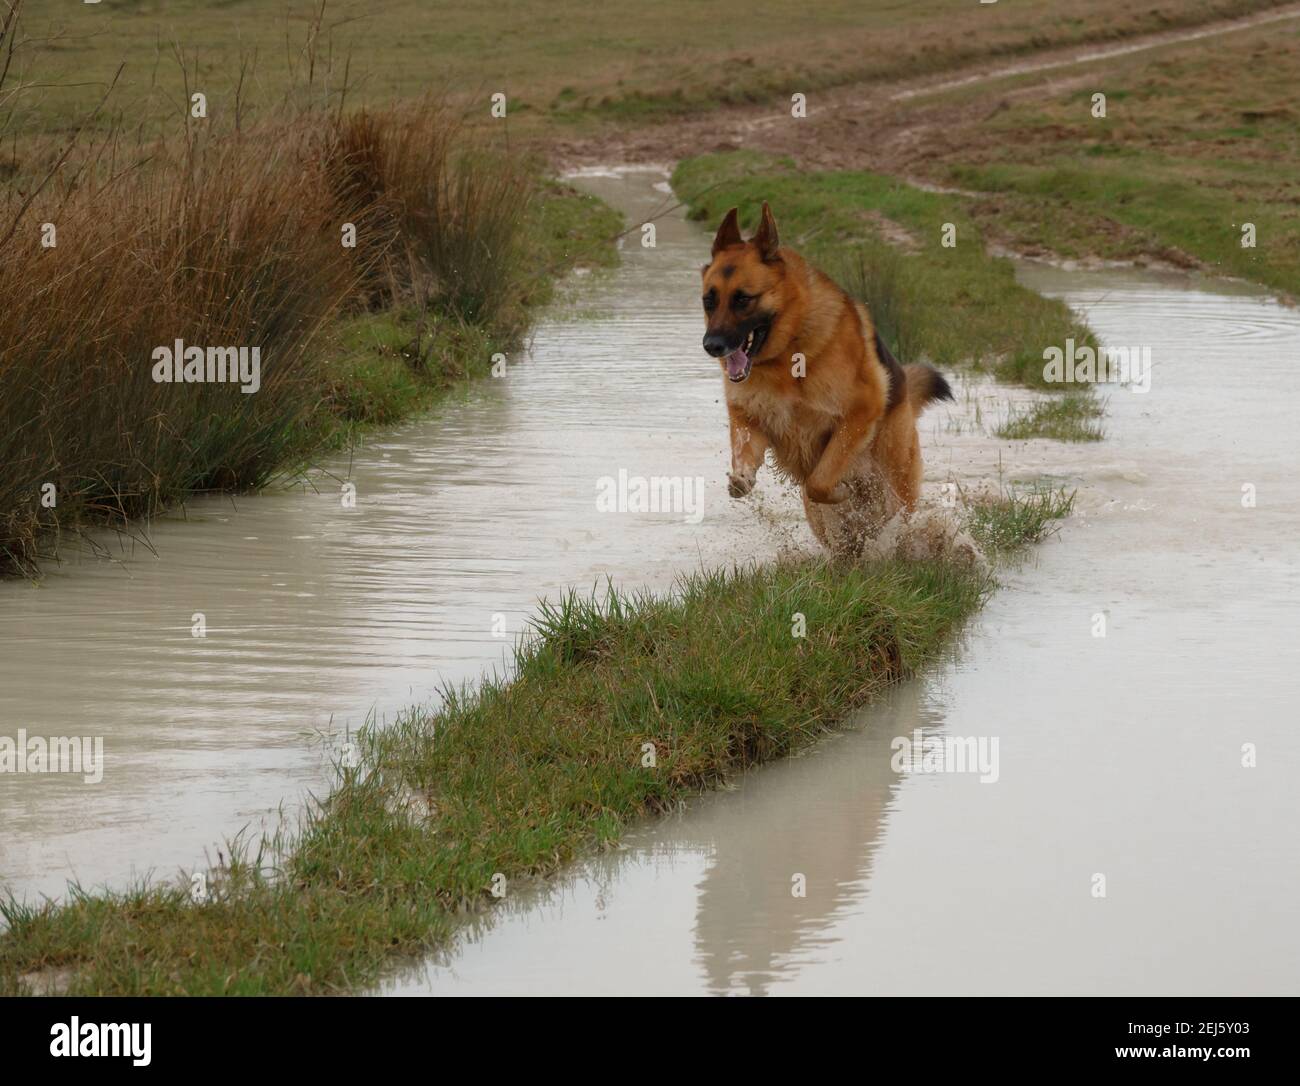 black and tan german shepherd alsatian running along a strip of land with water either side Stock Photo